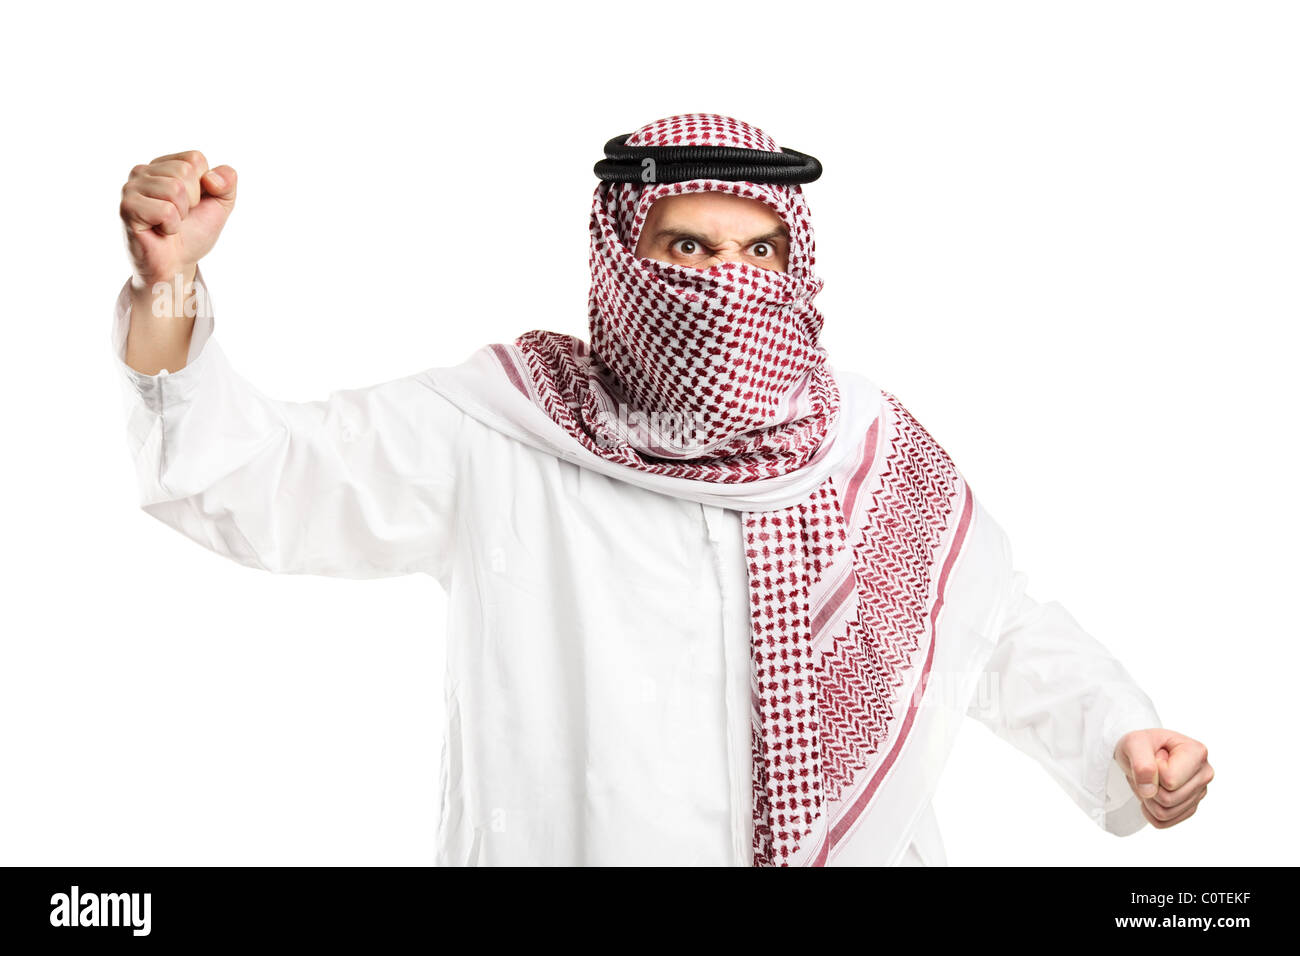 A furious arab man with covered face protesting Stock Photo